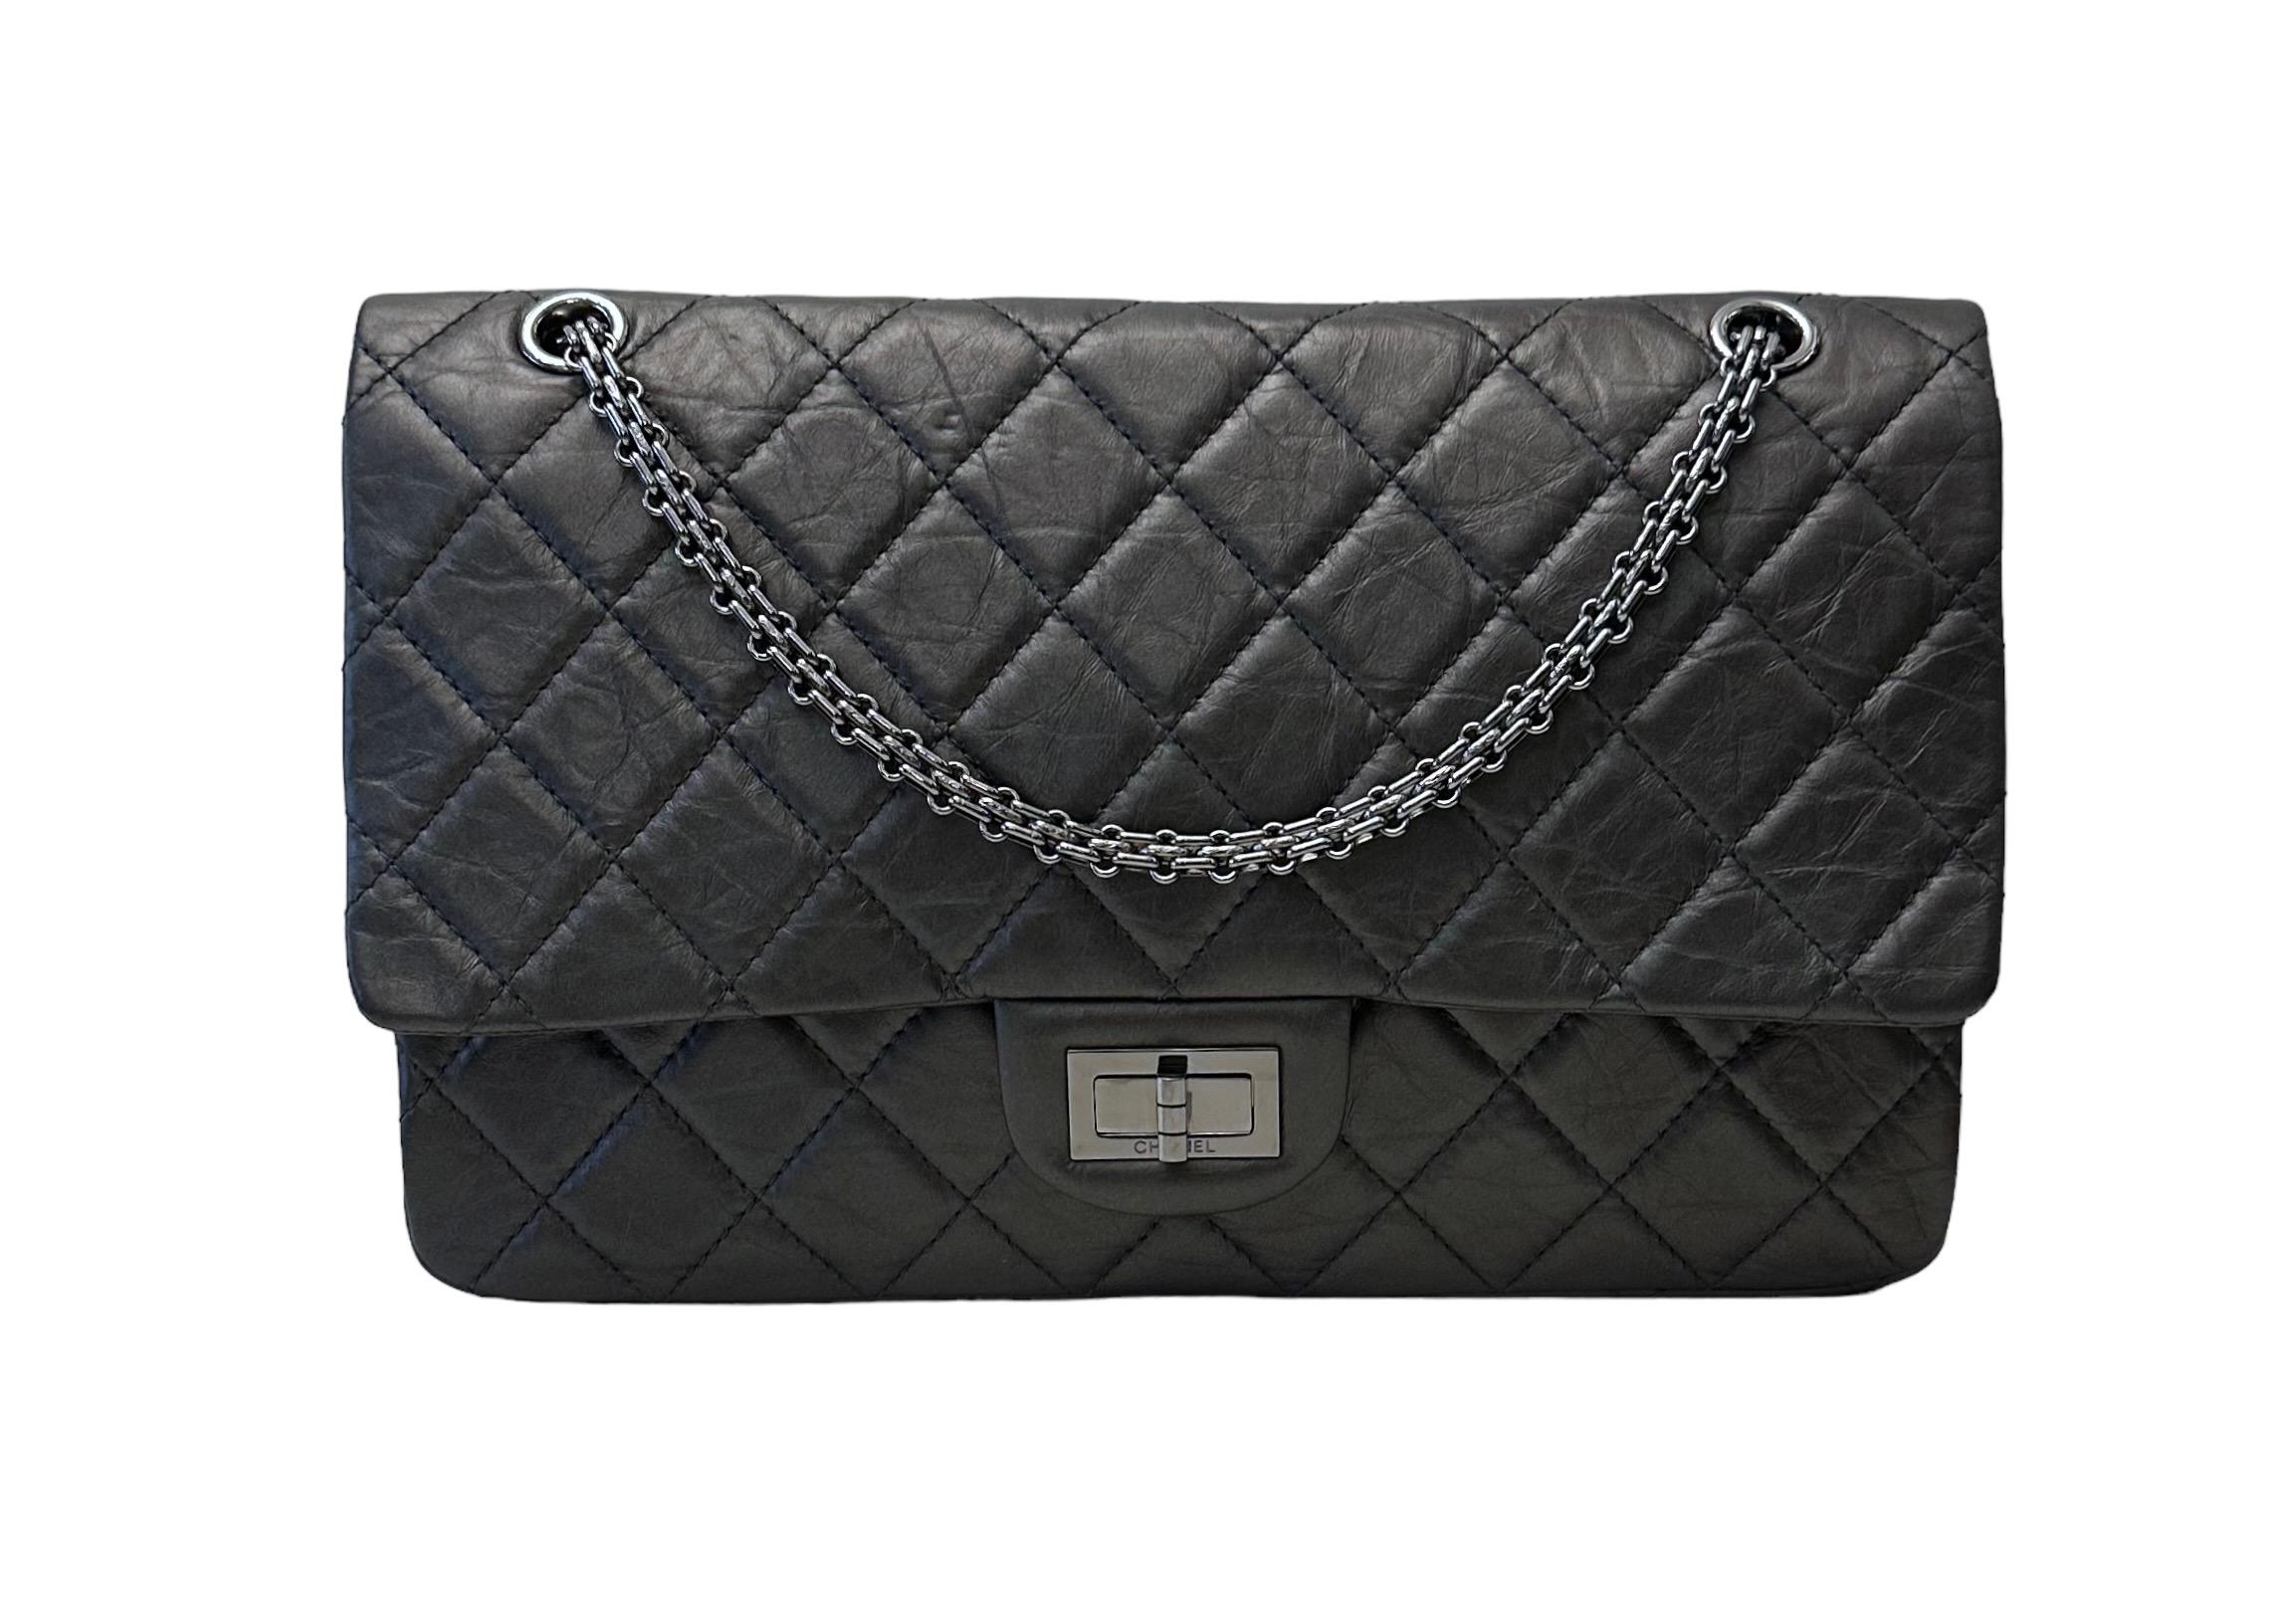 This gorgeous pre-owned Chanel 2.55 Classic Doubleflap Maxi Bag - 5 pockets is the most iconic handbag in the fashion world is crafted in a gorgeous dark grey aged quilted calfskin leather. 
It features a Mademoiselle turncock closure and a